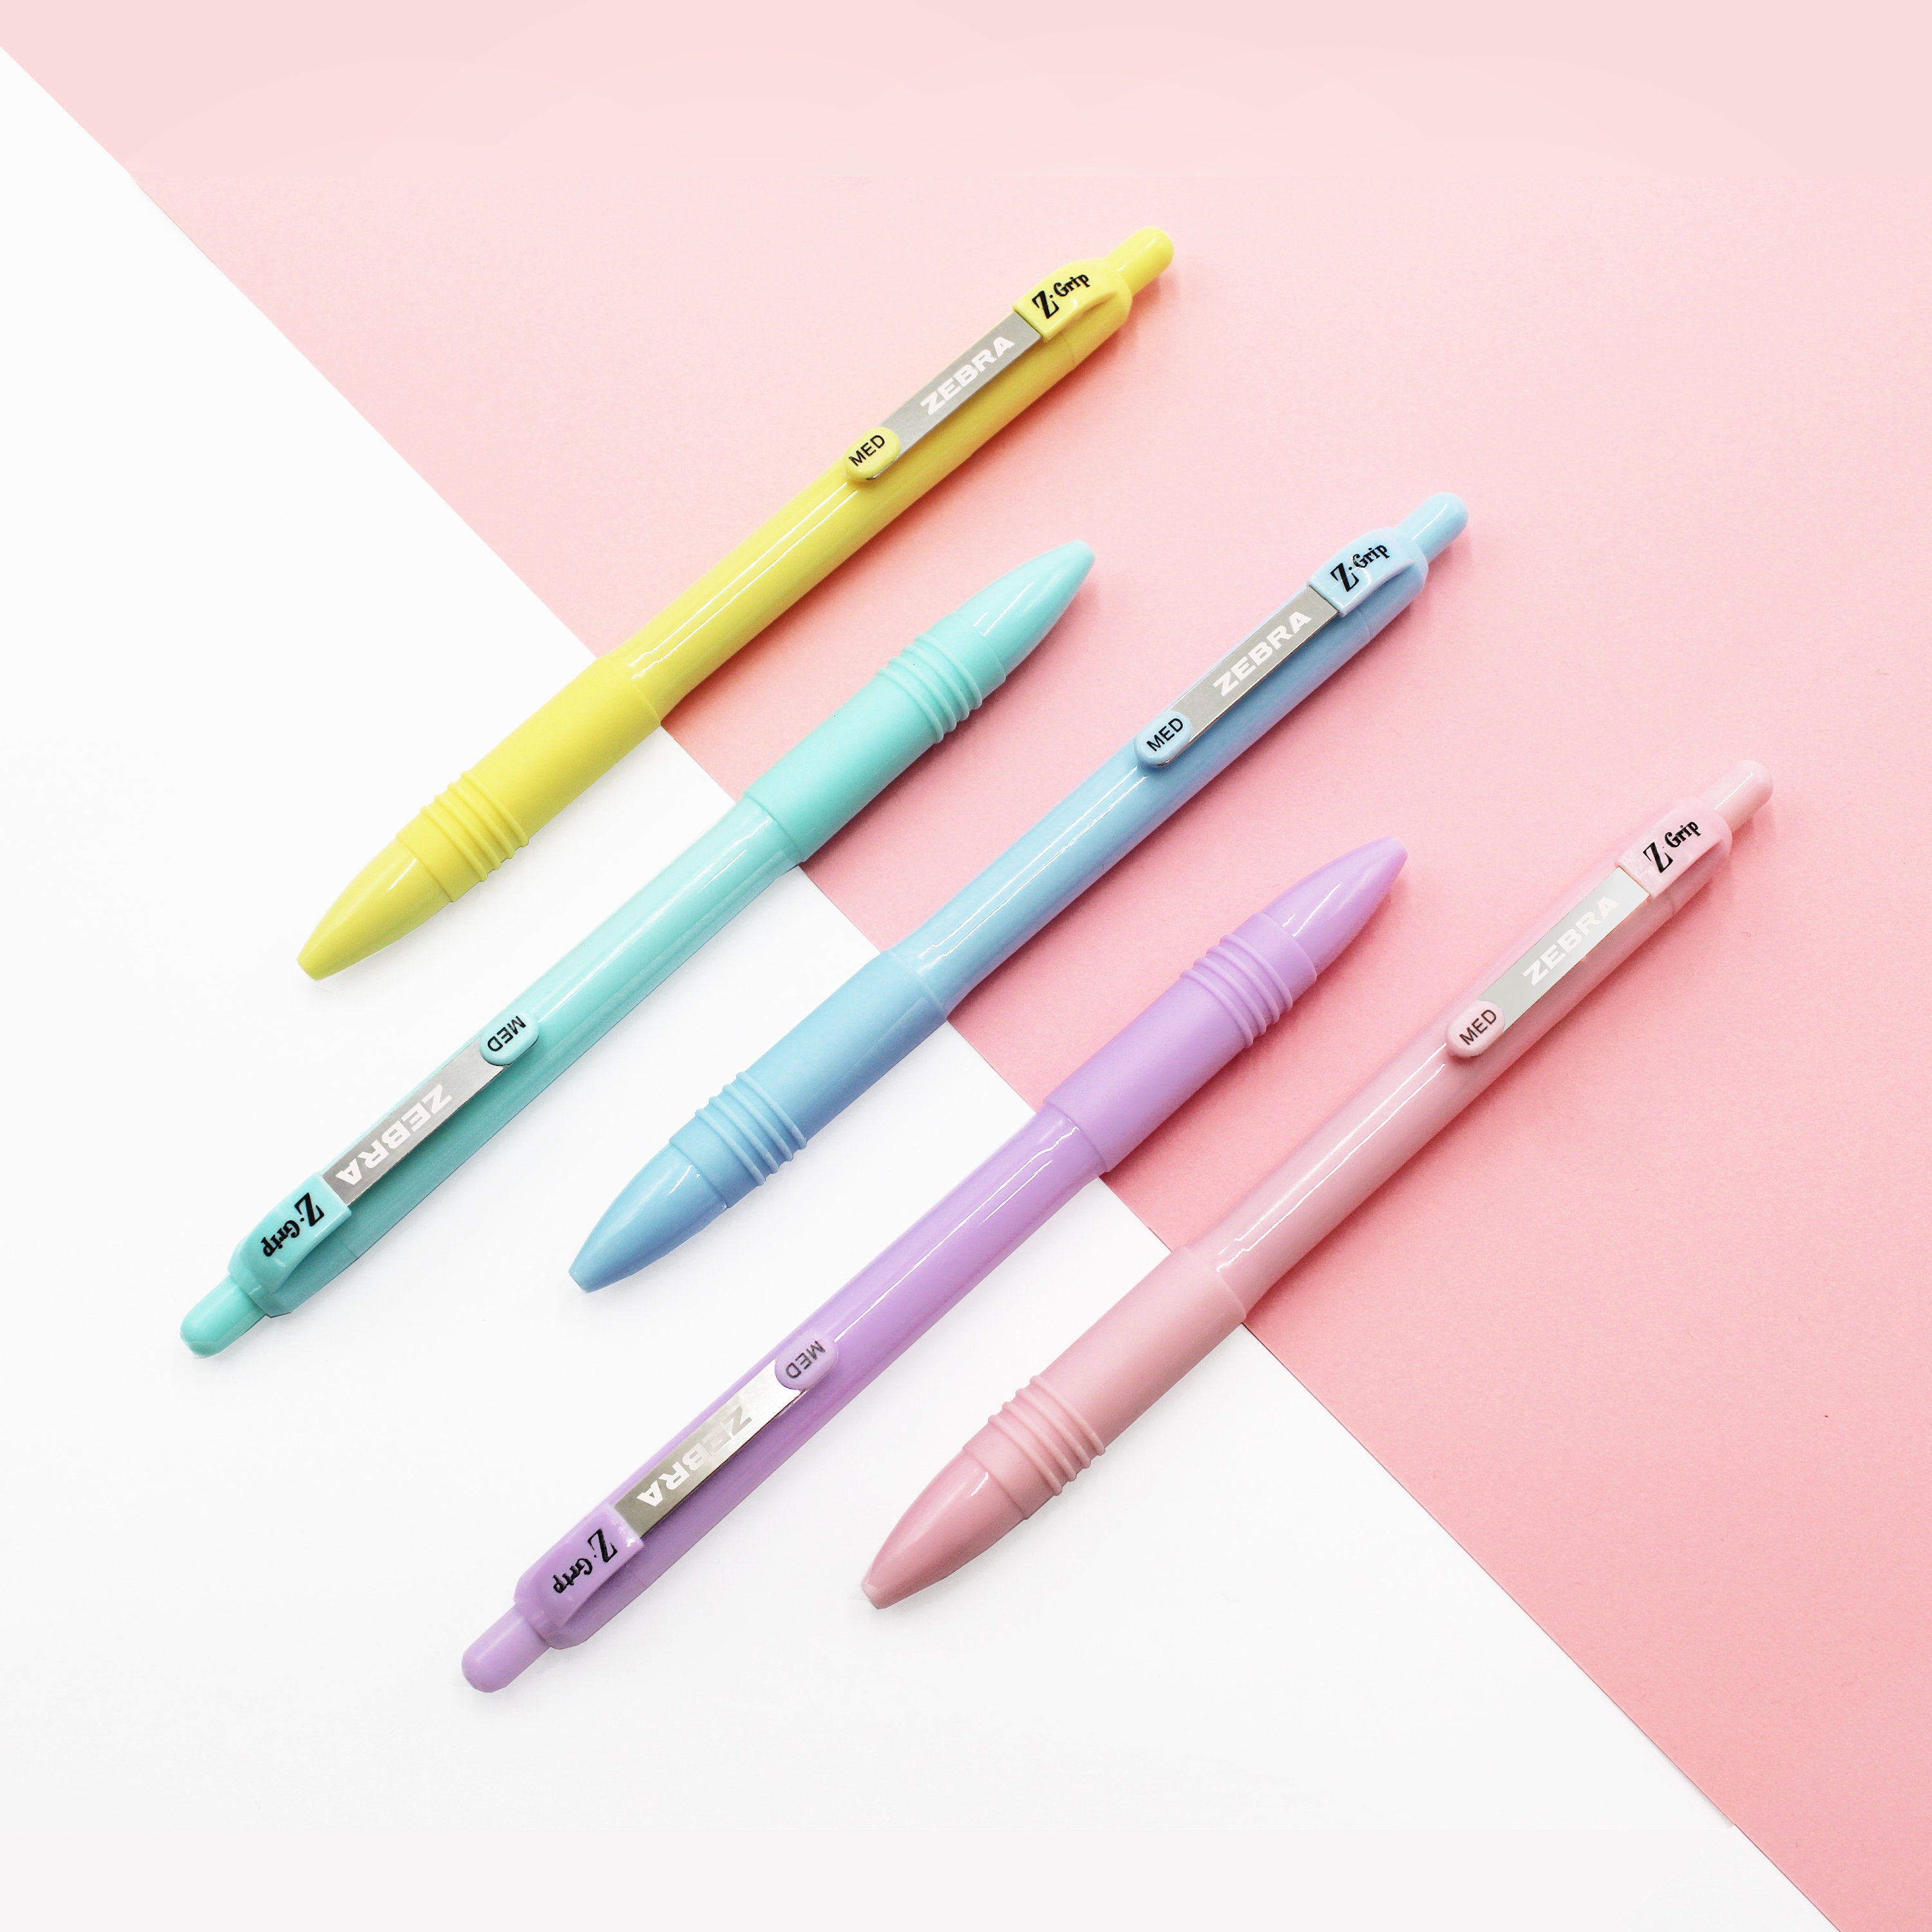 Coloured Gel Pens for Journaling,planner, Journal, Diary, Studying